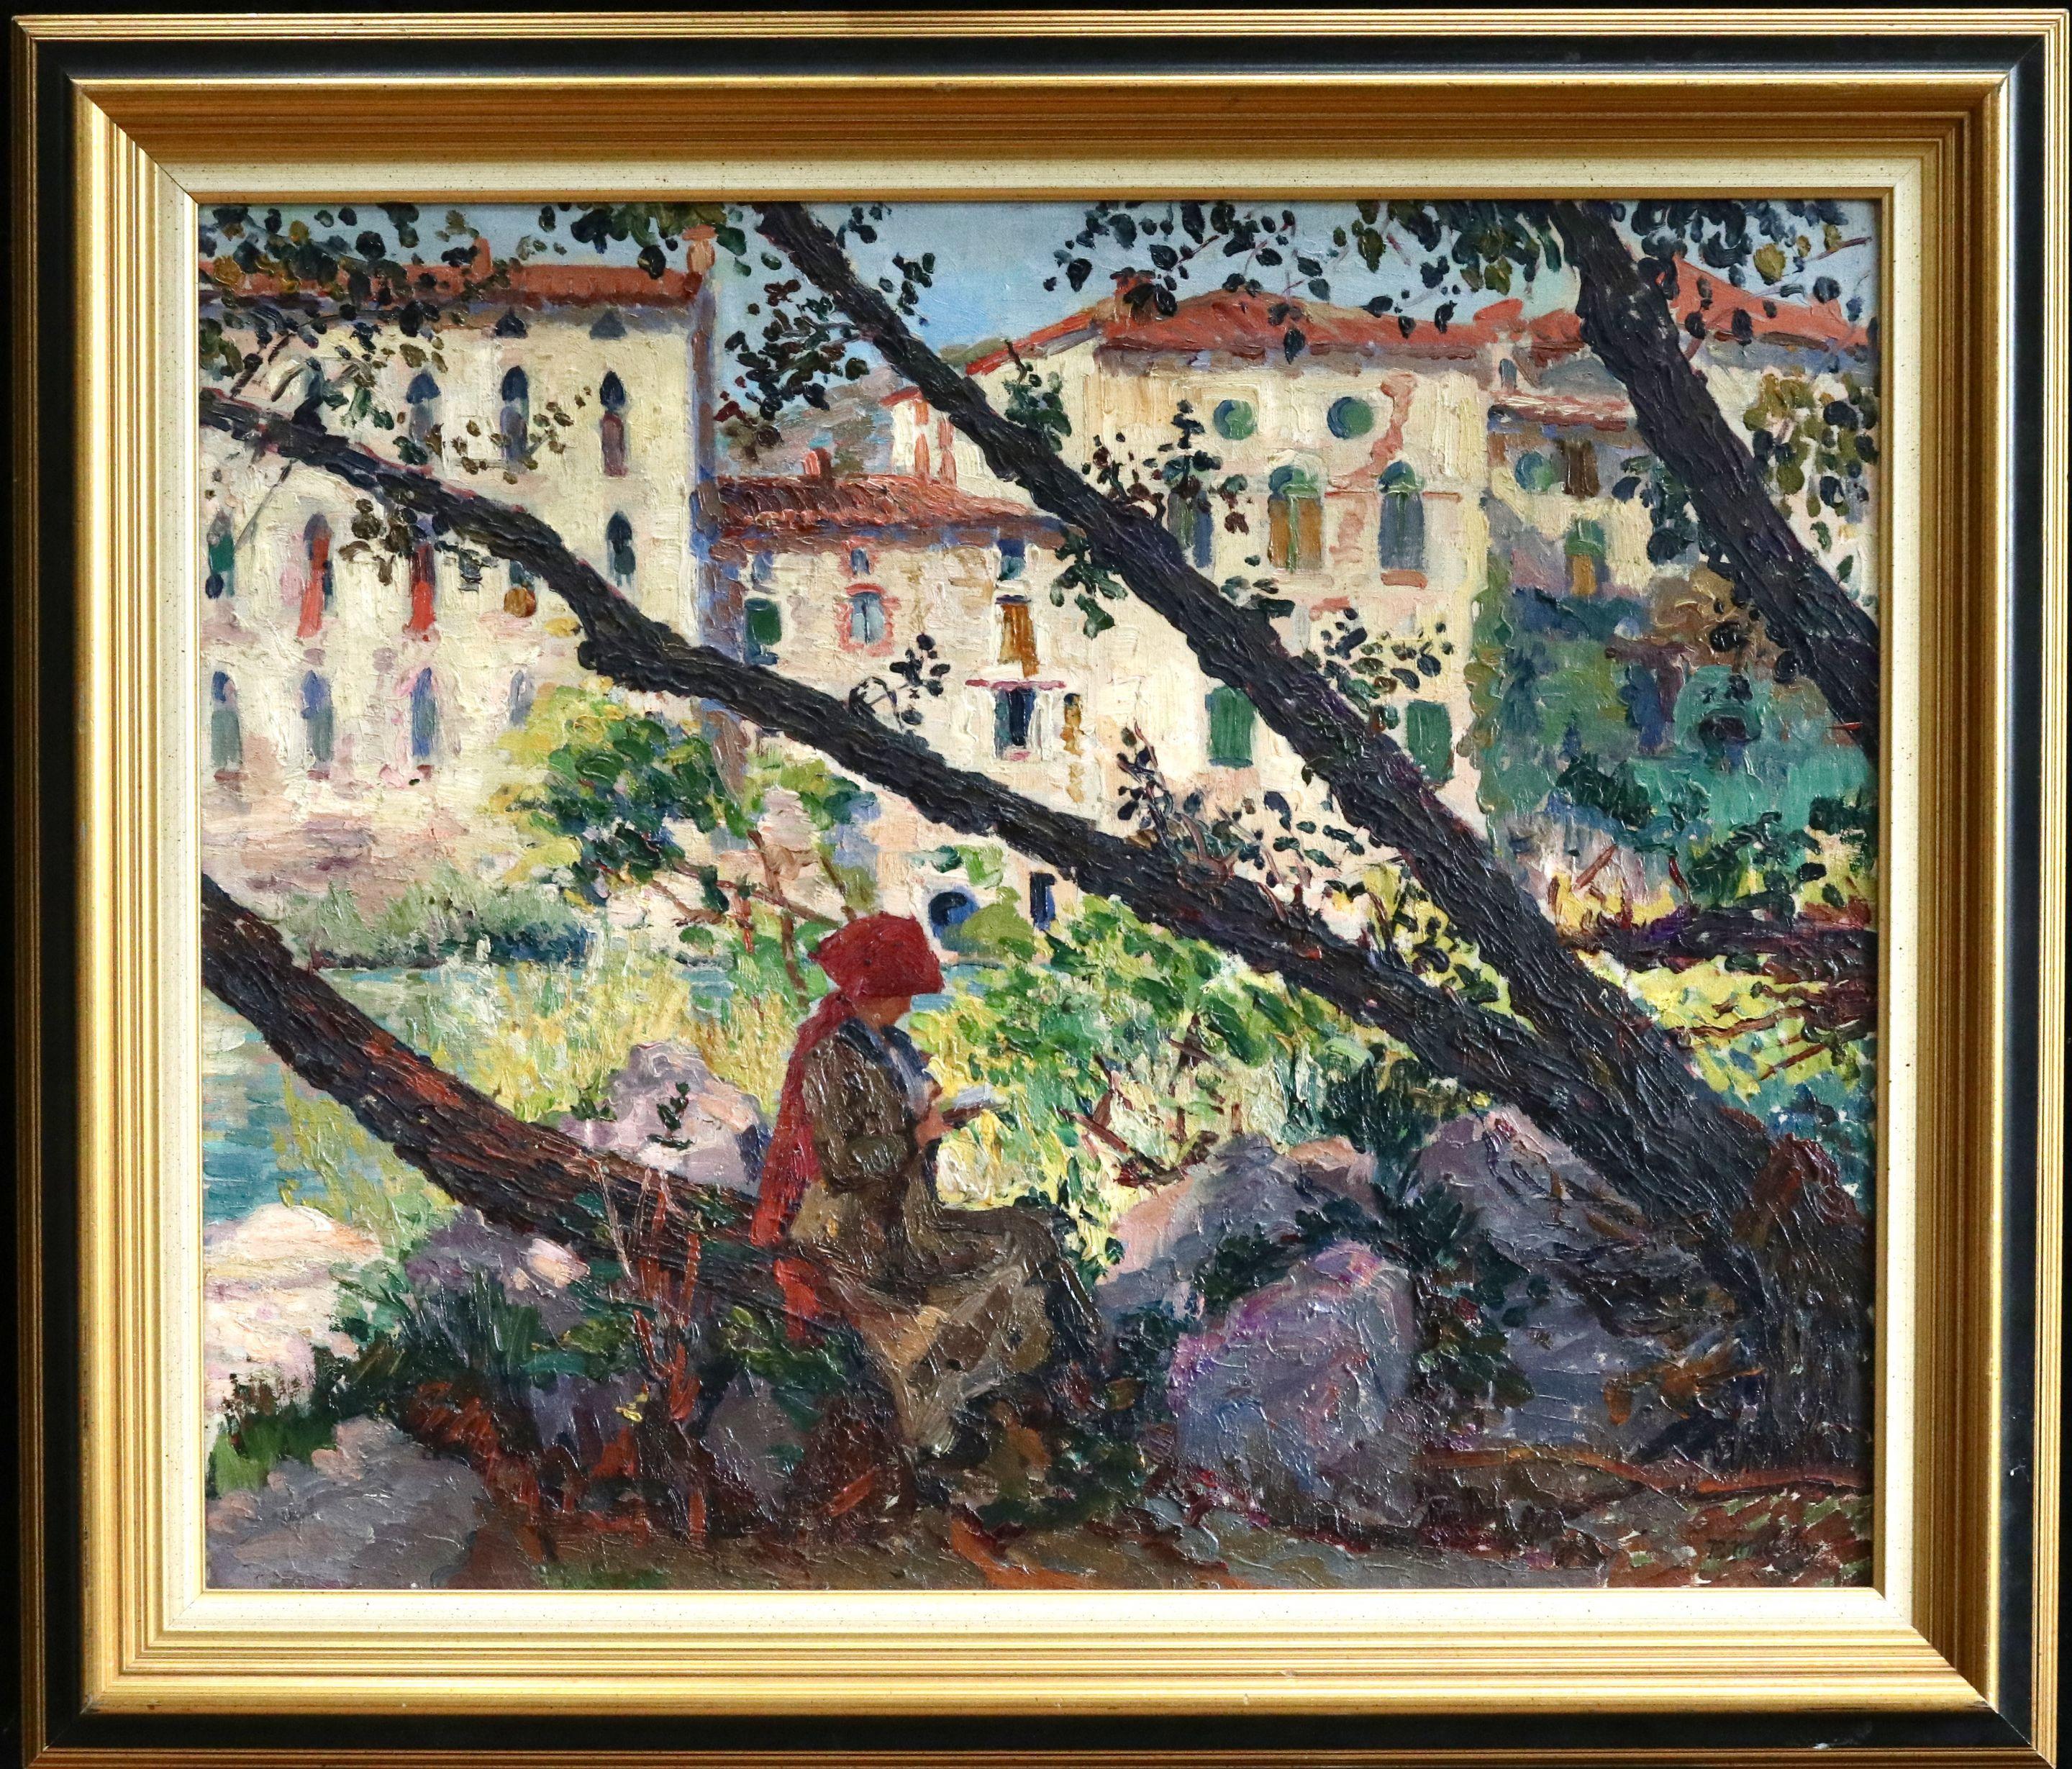 Oil on canvas circa 1910 by Paul Madeline depicting and elegant woman sitting in the shade of the tree reading, with the river and buildings in the background. Signed lower right. Framed dimensions are 27 inches high by 31 inches wide.

Paul